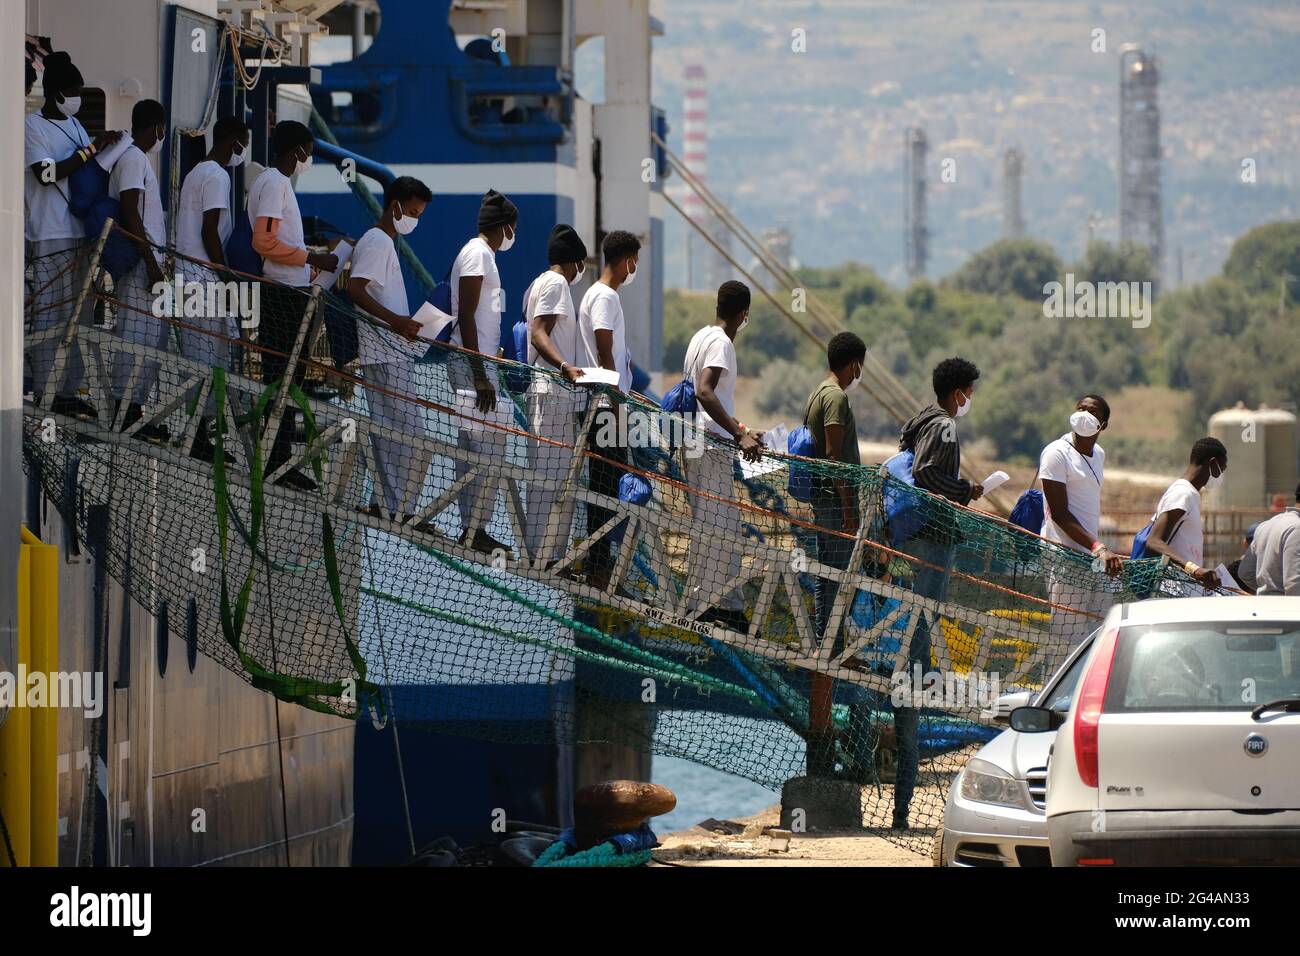 AUGUSTA, SICILY, ITALY – JUNE 18: 415 migrants rescued by Geo Barents vessel of Doctors Without Borders arrived in Augusta for disembarkation on 2021 in Sicily. 'In less than 48 hours, seven rescues and 410 persons saved from drowning,' tweeted the humanitarian organization Doctors without Borders (MSF) on Saturday, June 12. Among those rescued are women and children.The Geo Barents is the largest search-and-rescue ship of the six the NGO has worked with until now. It has capacity for 300 people and is carrying a ton of medicines, 1,200 blankets and 12.5 tons of food. Stock Photo